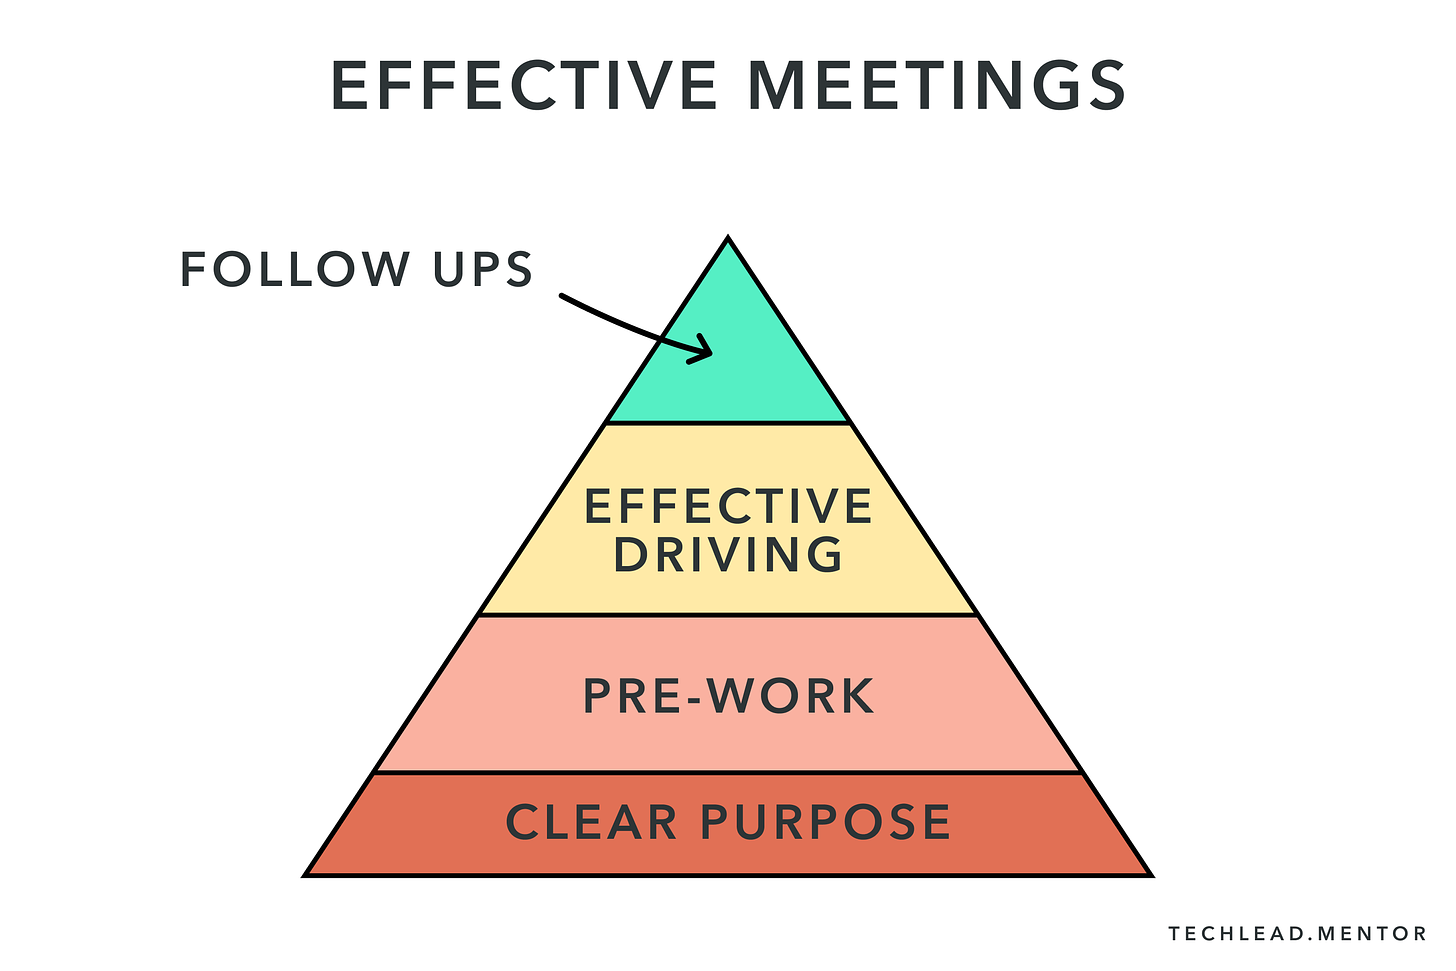 Effective meetings have a clear purpose and effective driving.